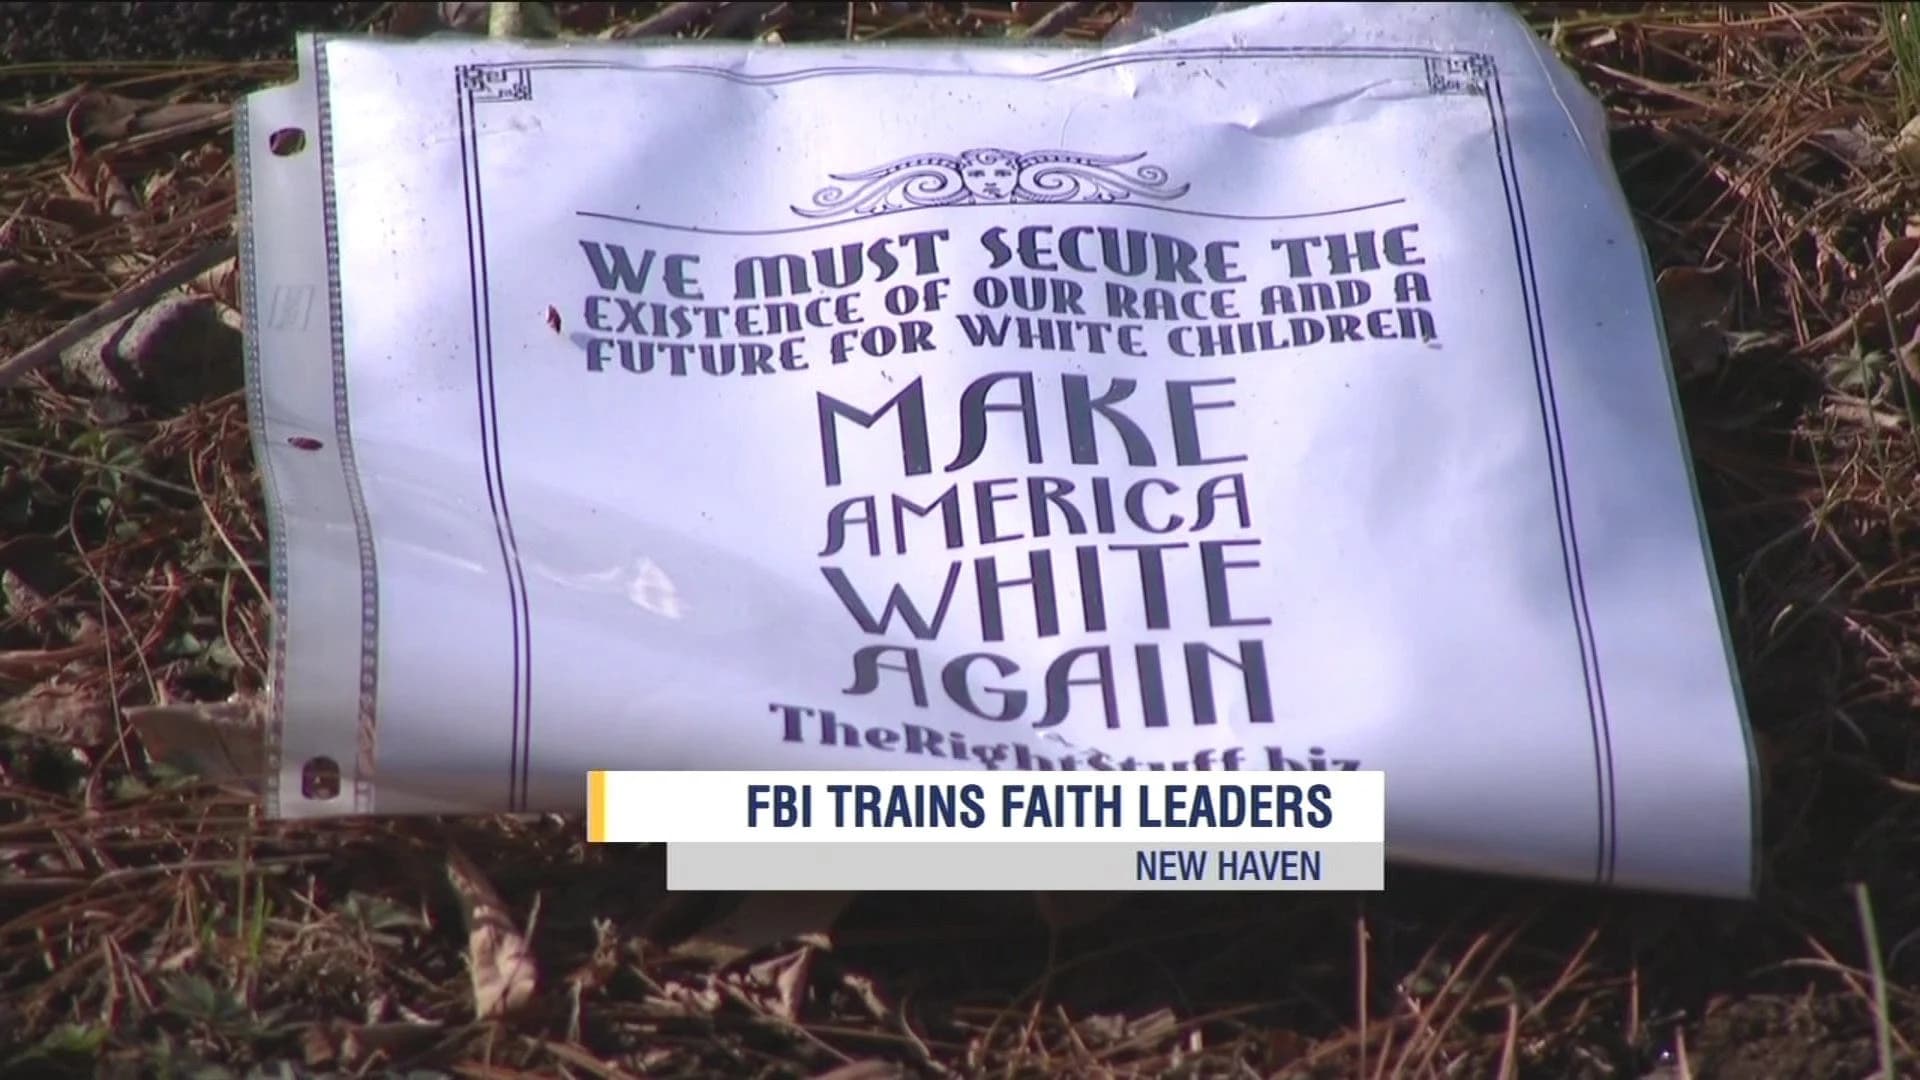 Faith leaders get lessons from FBI in wake of threats